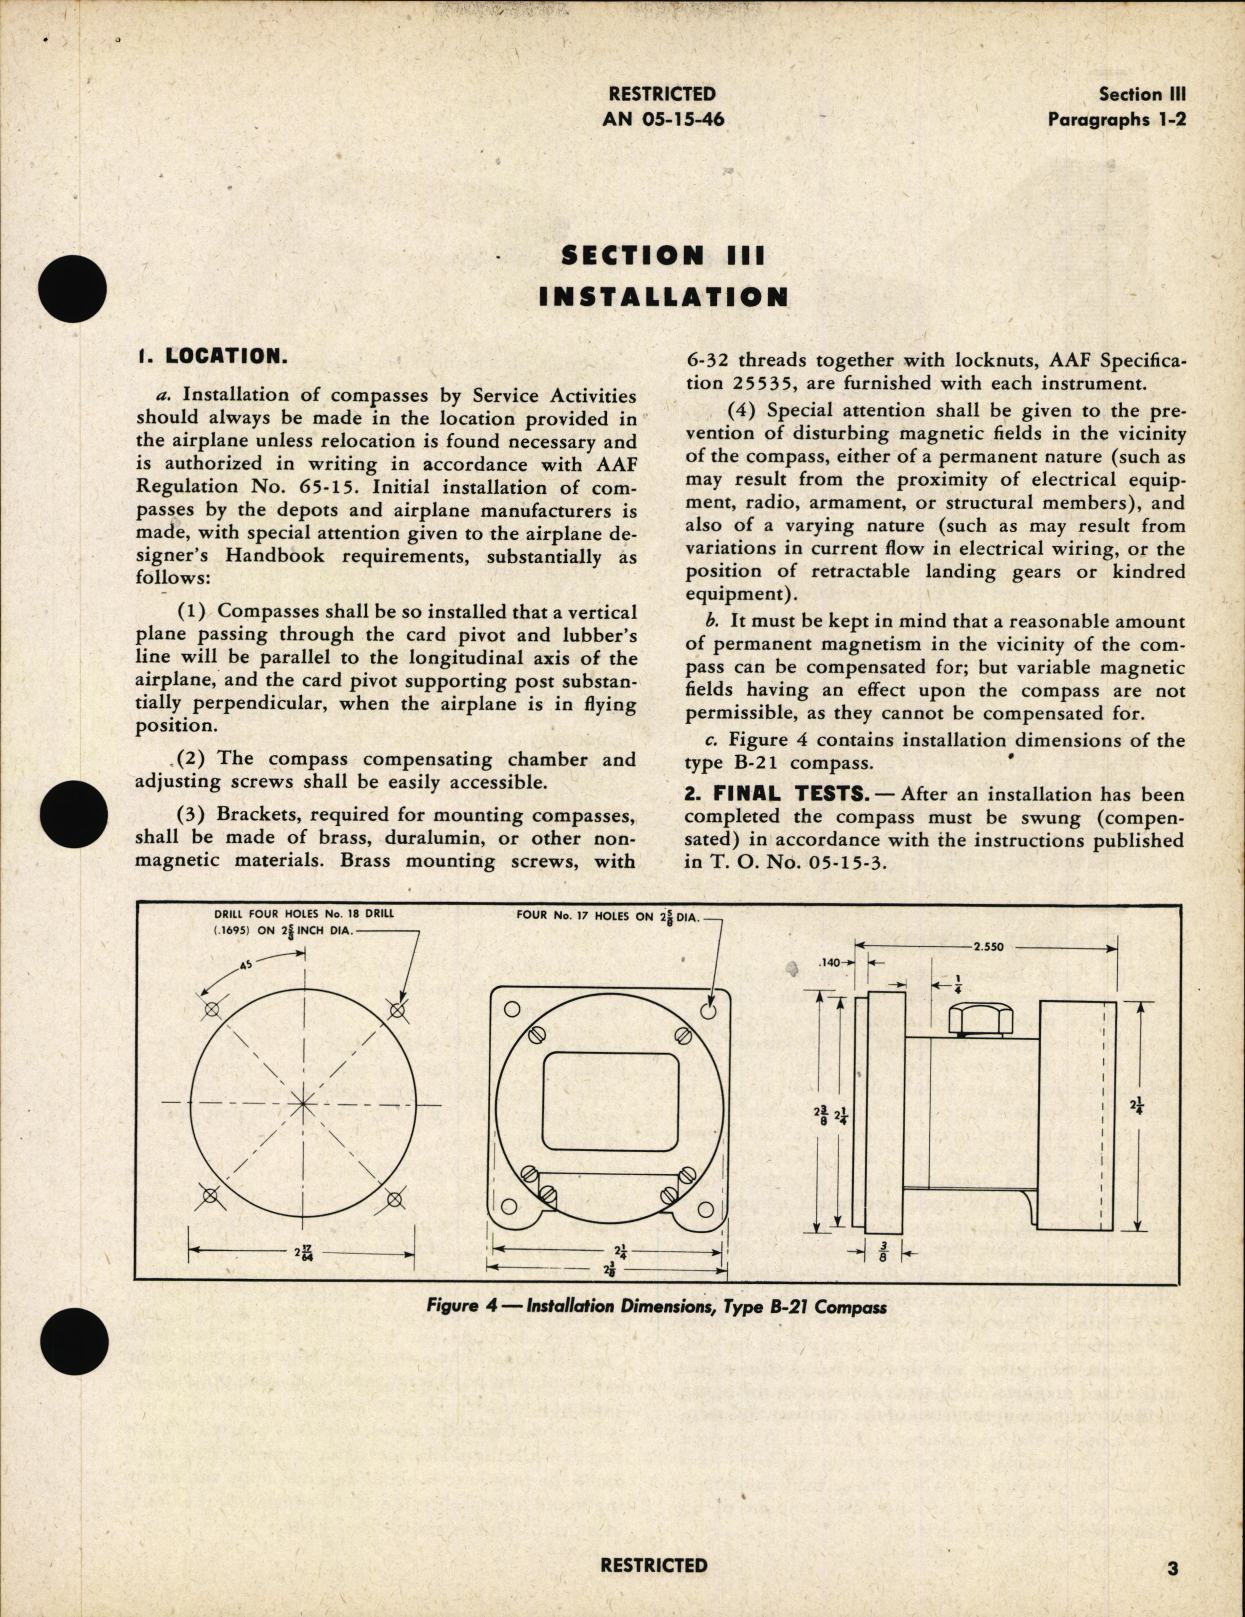 Sample page 7 from AirCorps Library document: Handbook of Instructions with Parts Catalog for Magnetic Compass Type B-21